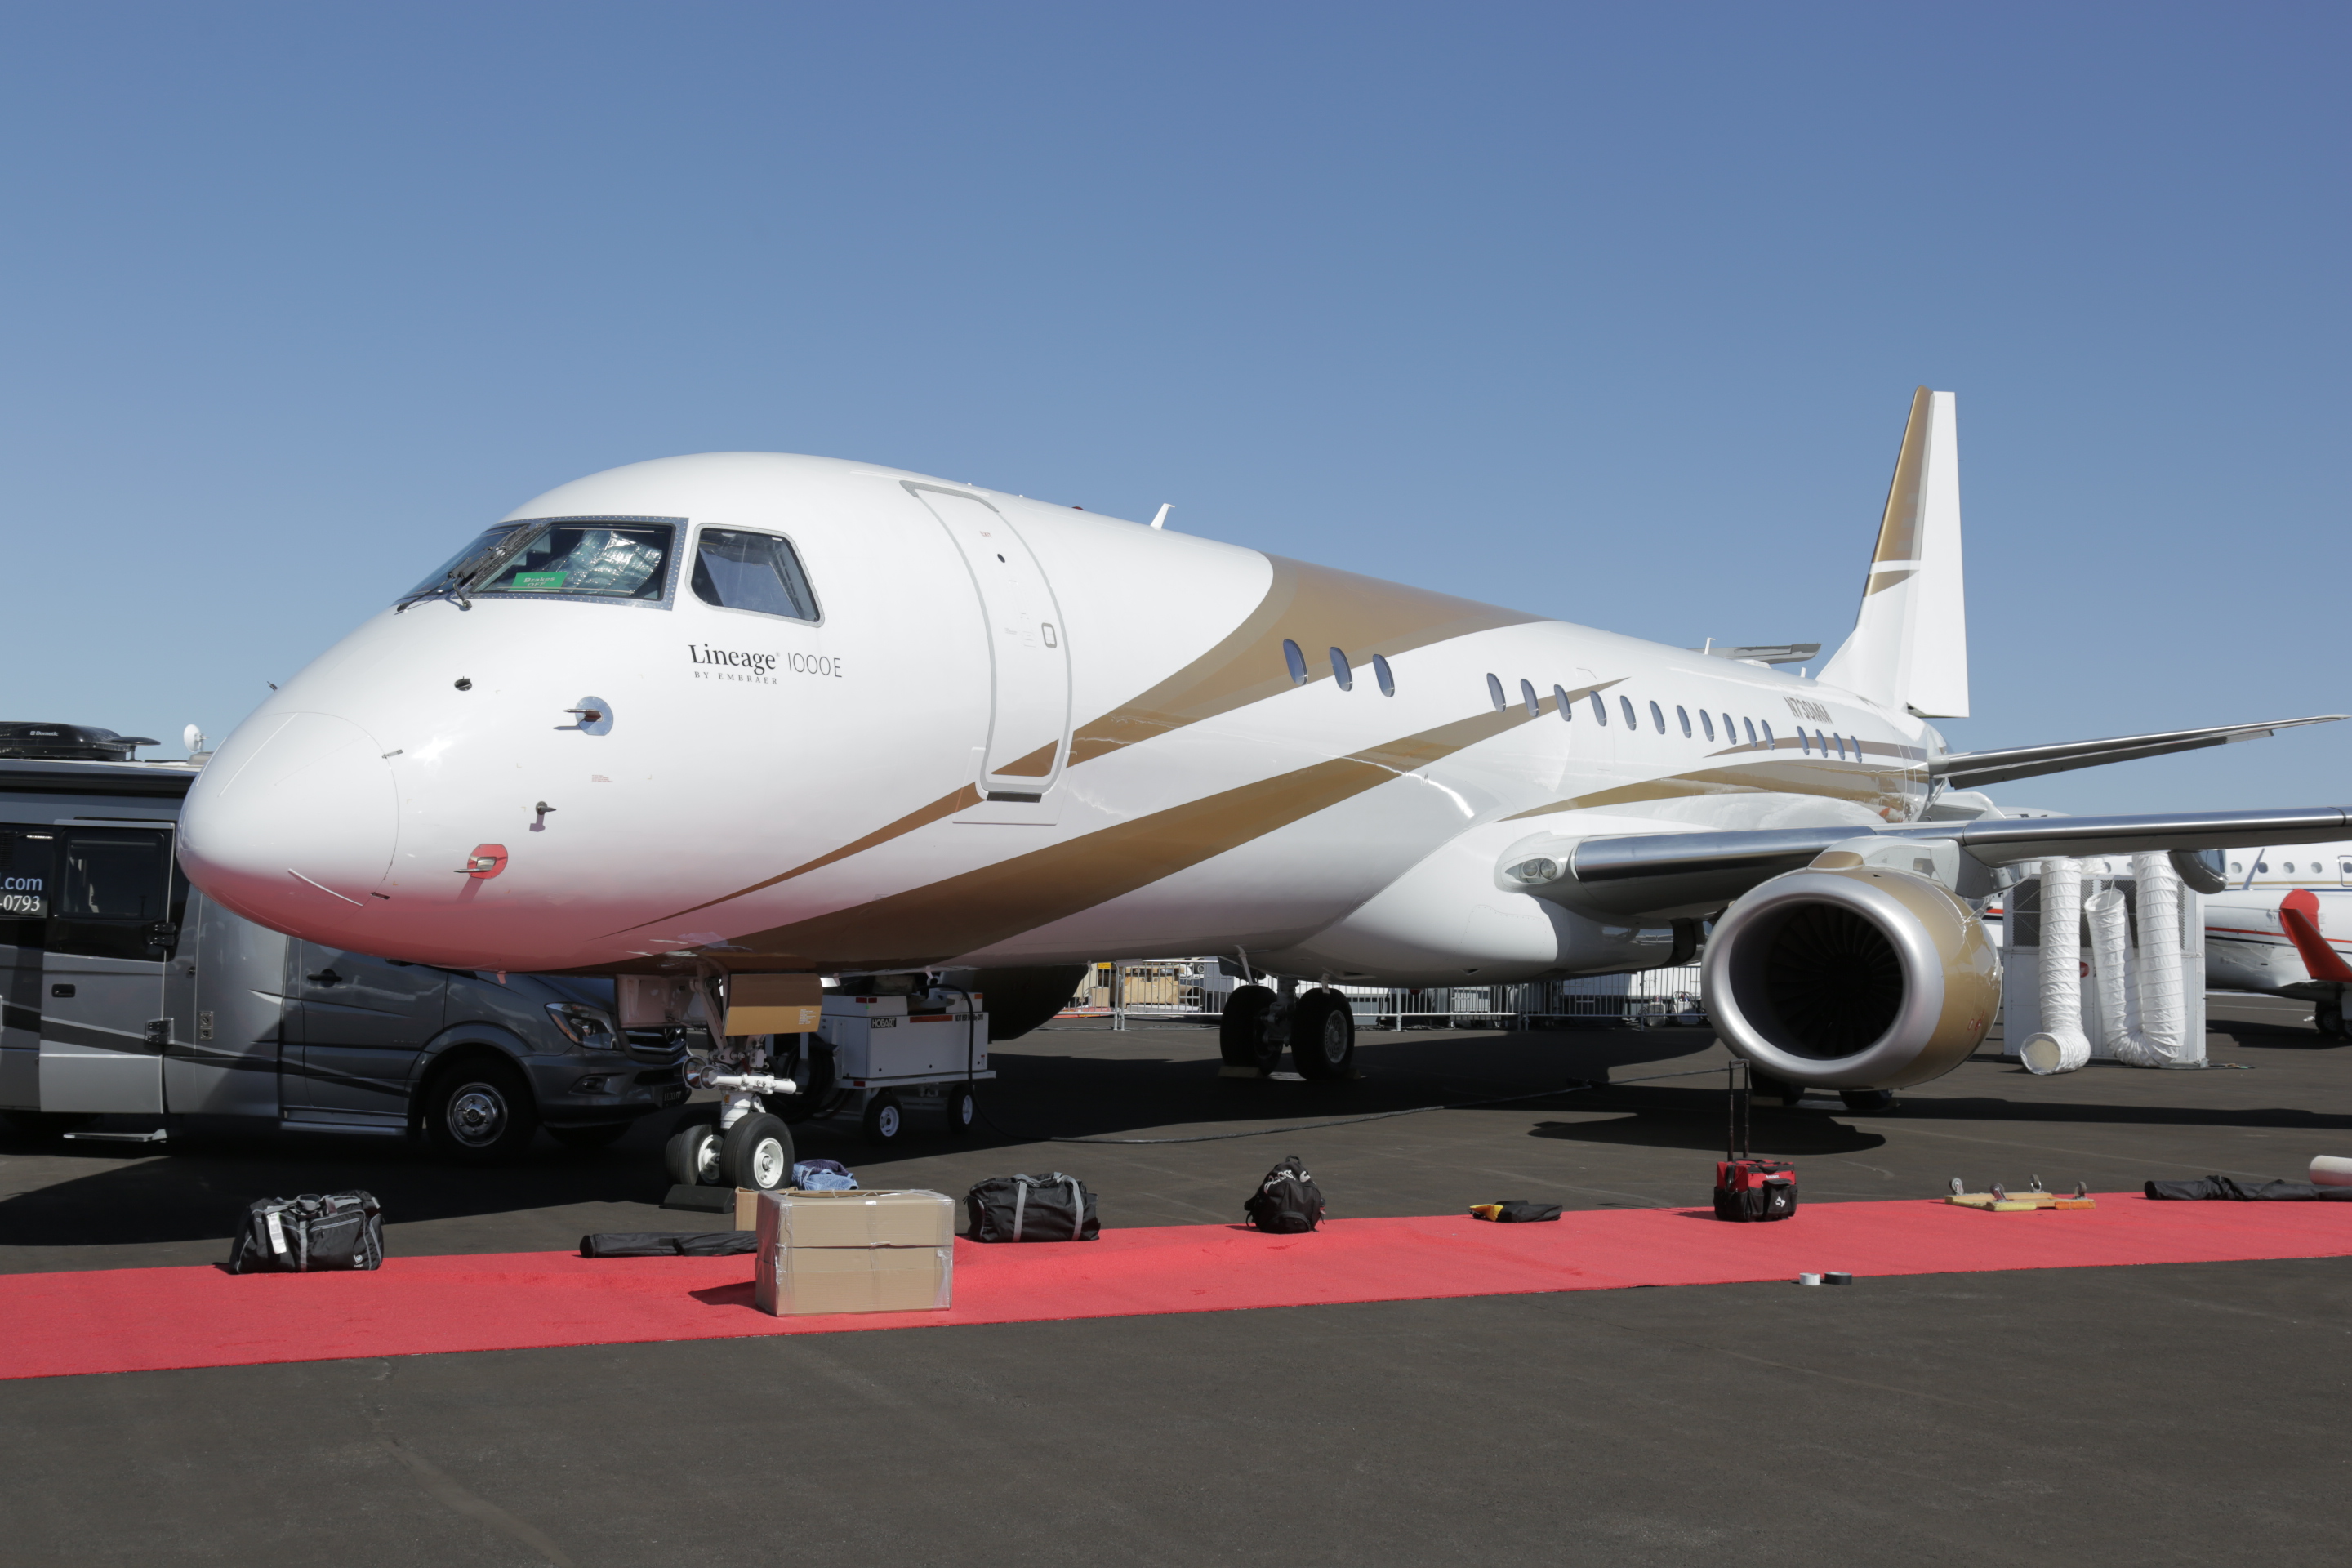 embraer lineage 1000e skyacht one